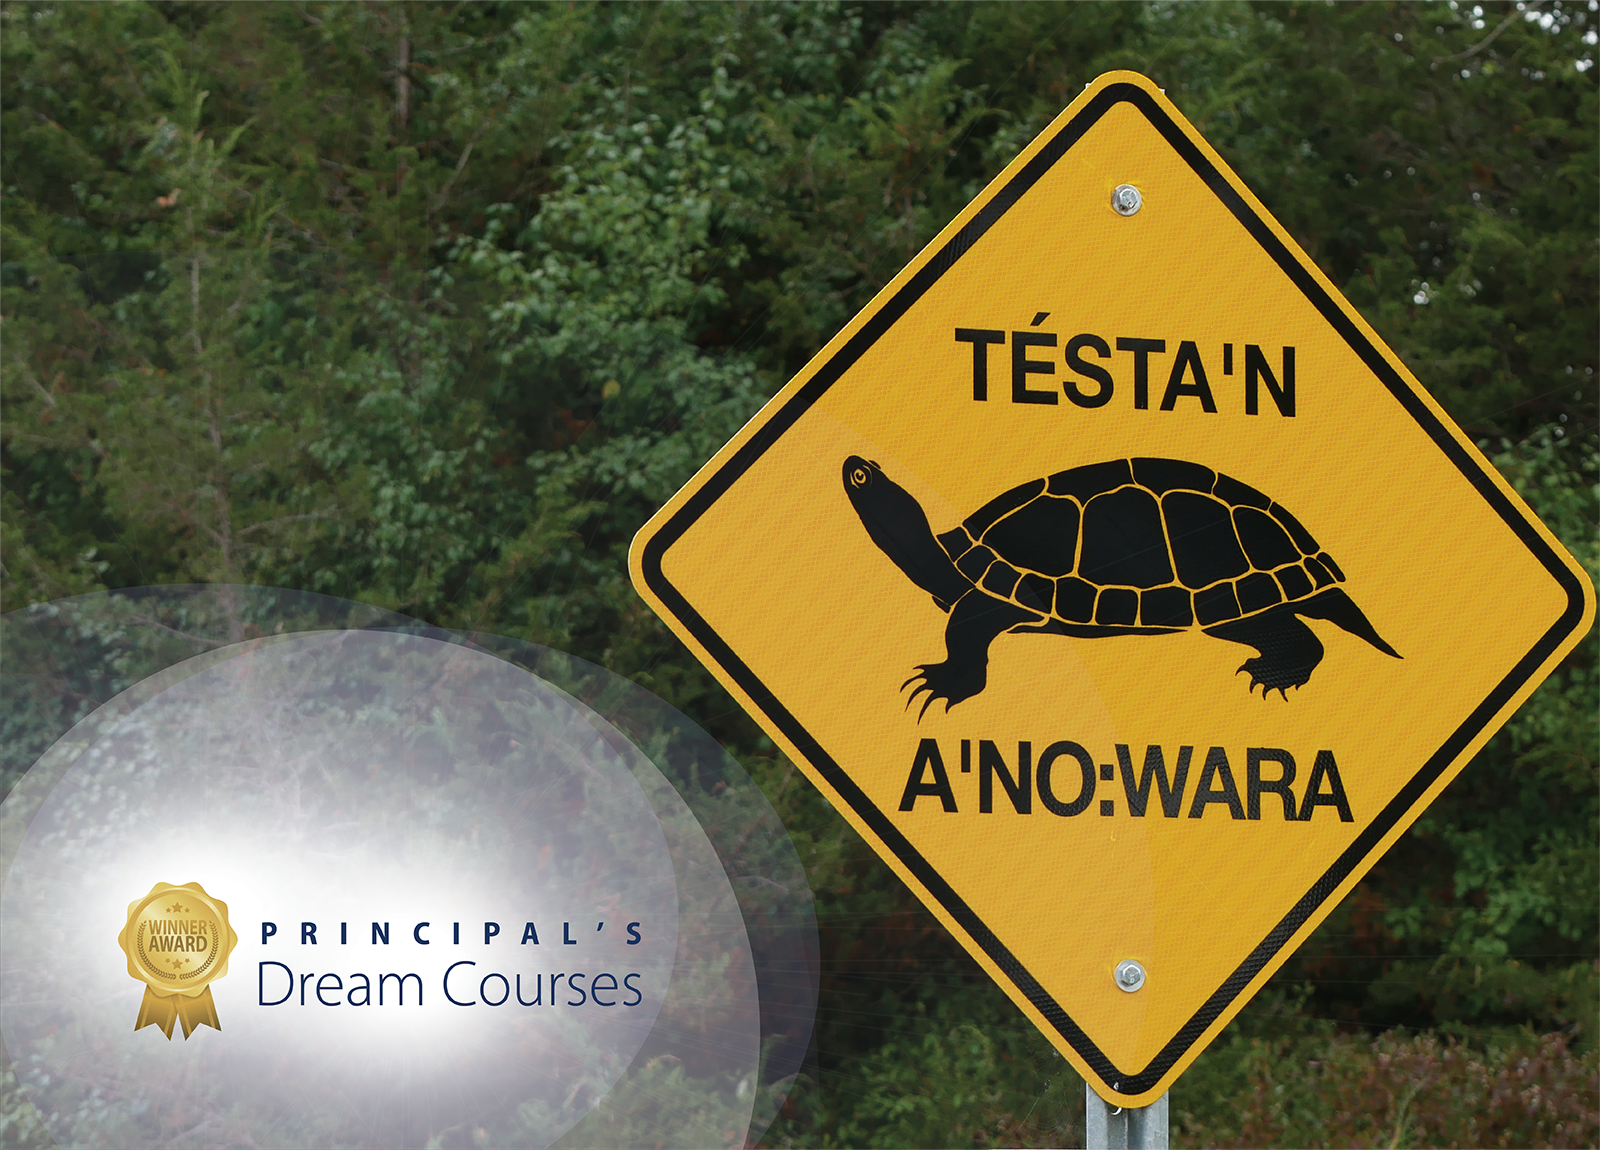 Turtle crossing sign and principal's dream course graphic